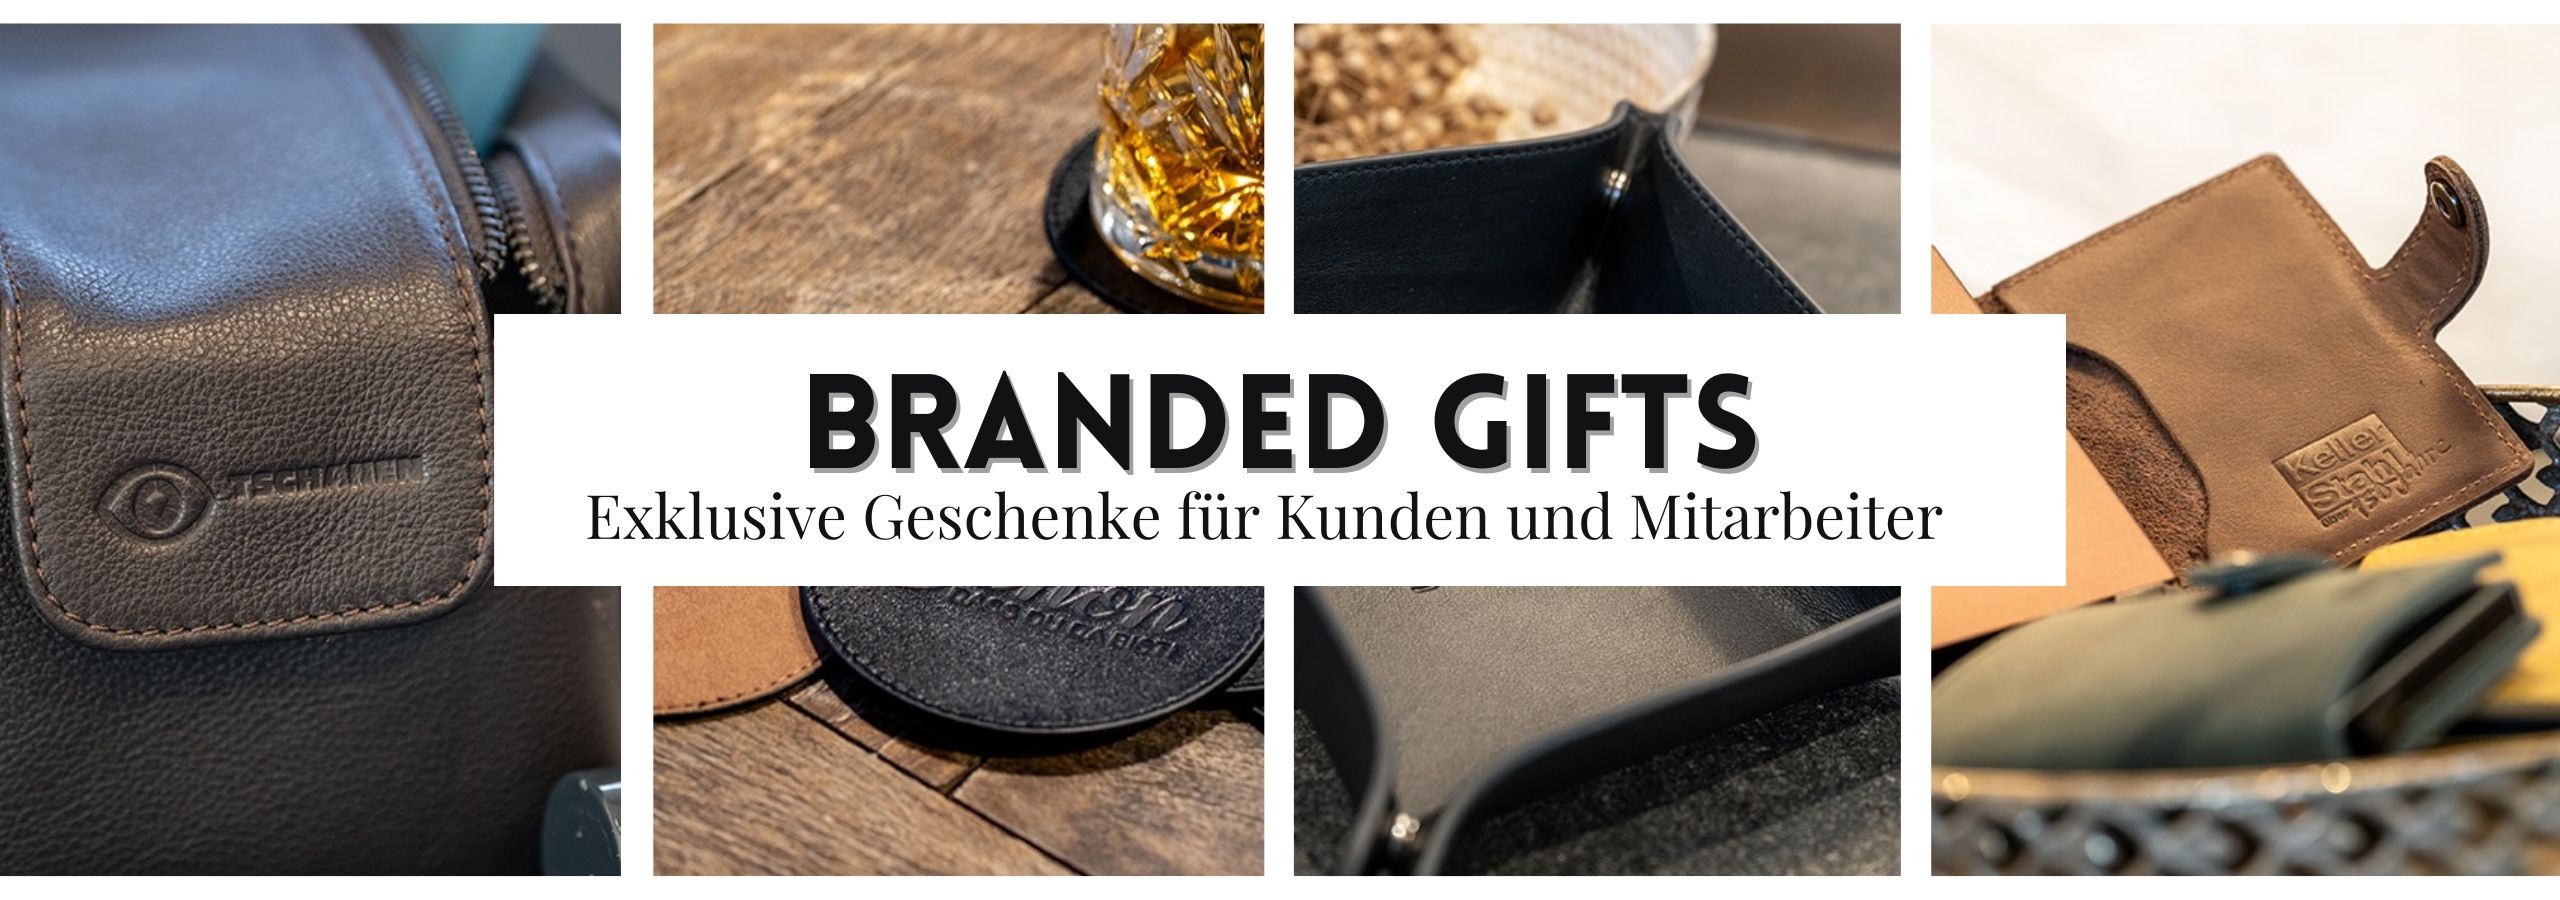 Branded gifts